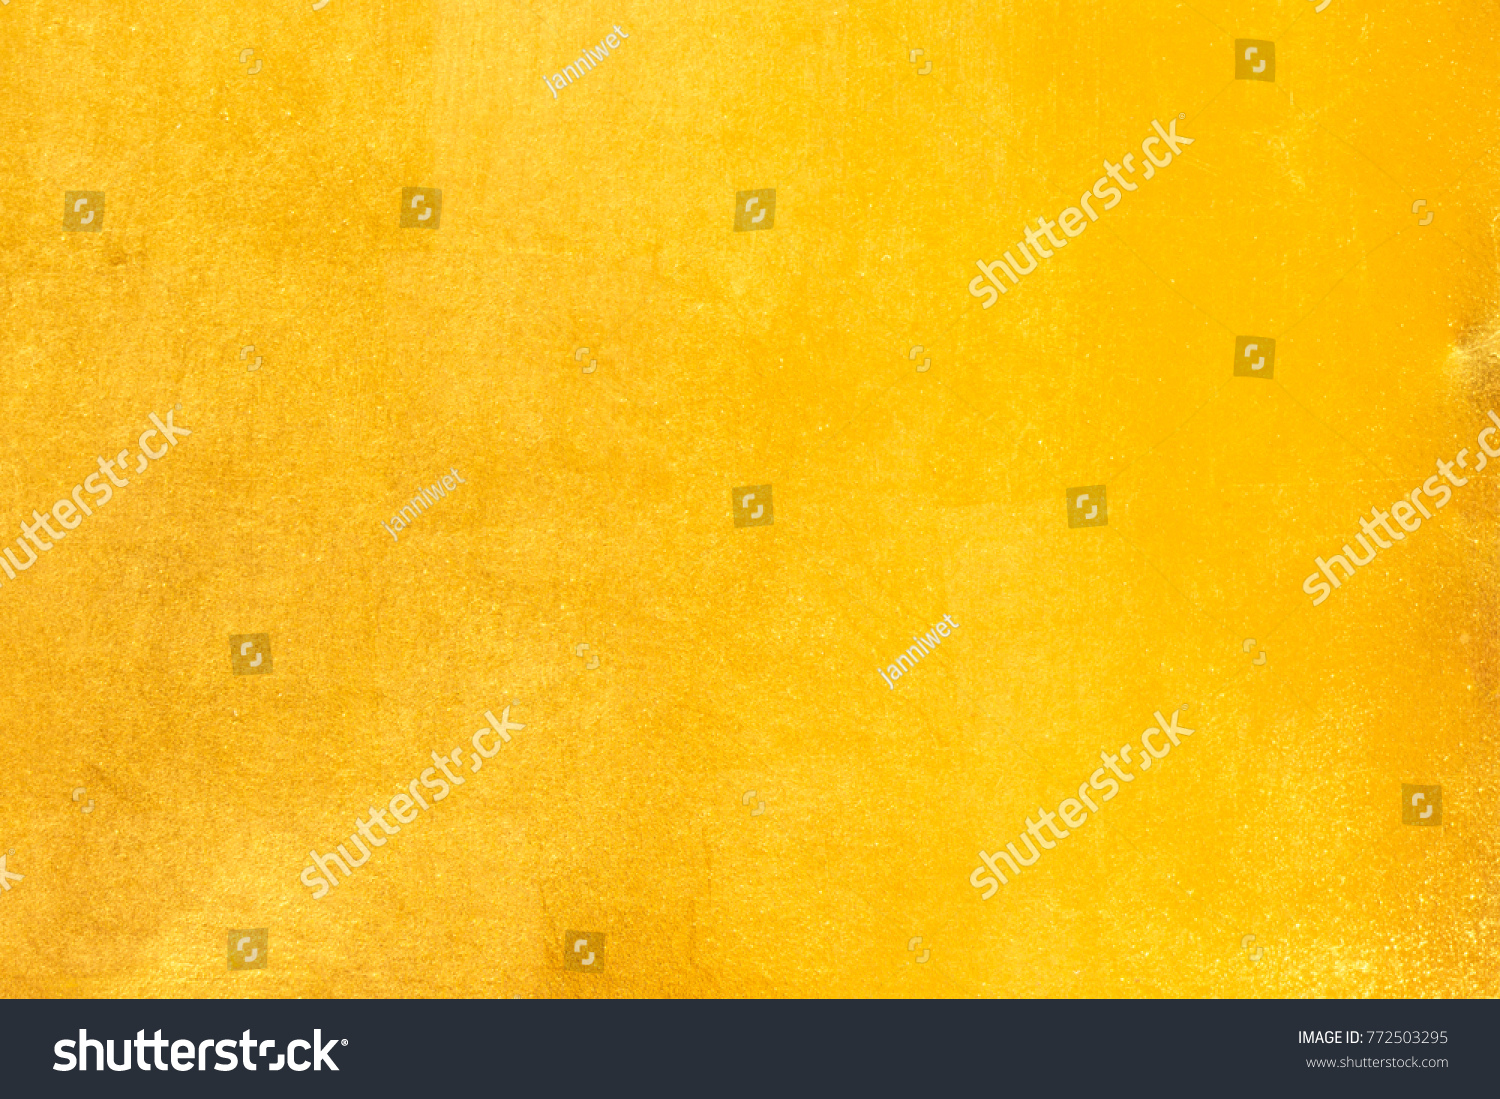 Shiny yellow leaf gold foil texture background #772503295